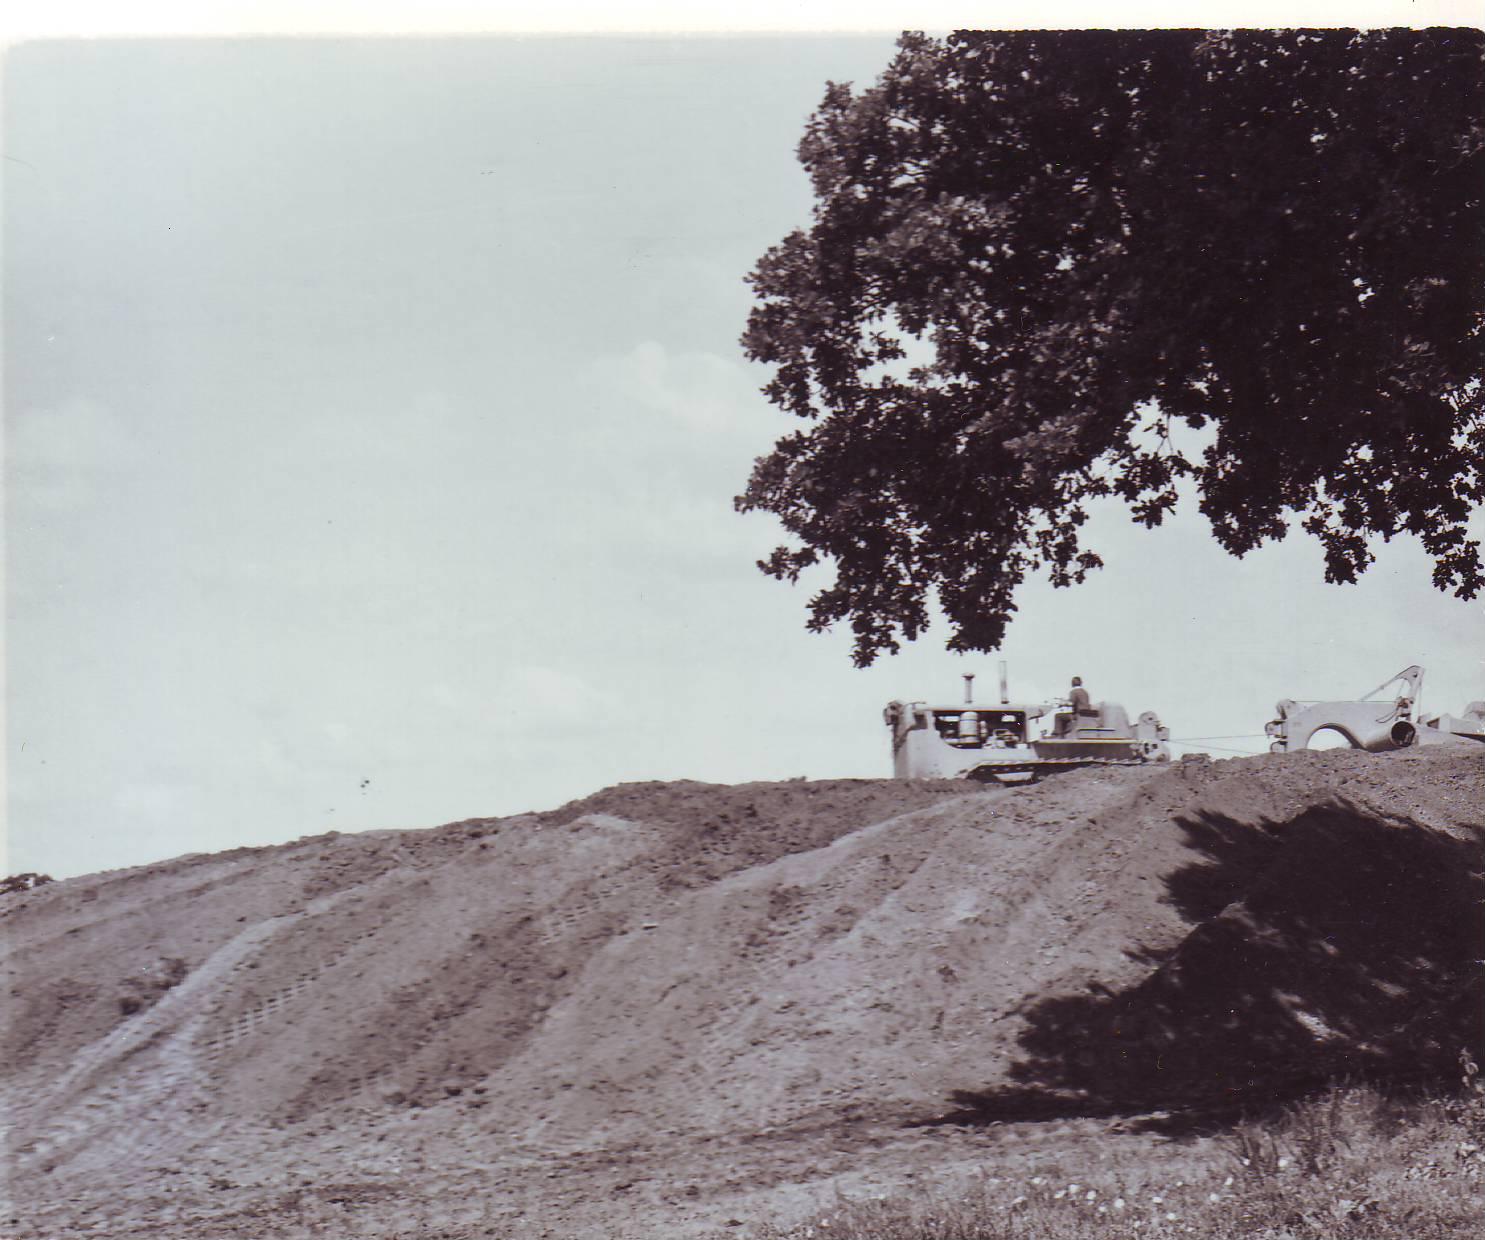 Groundwork at Maybush in the early stage, Jul 1964